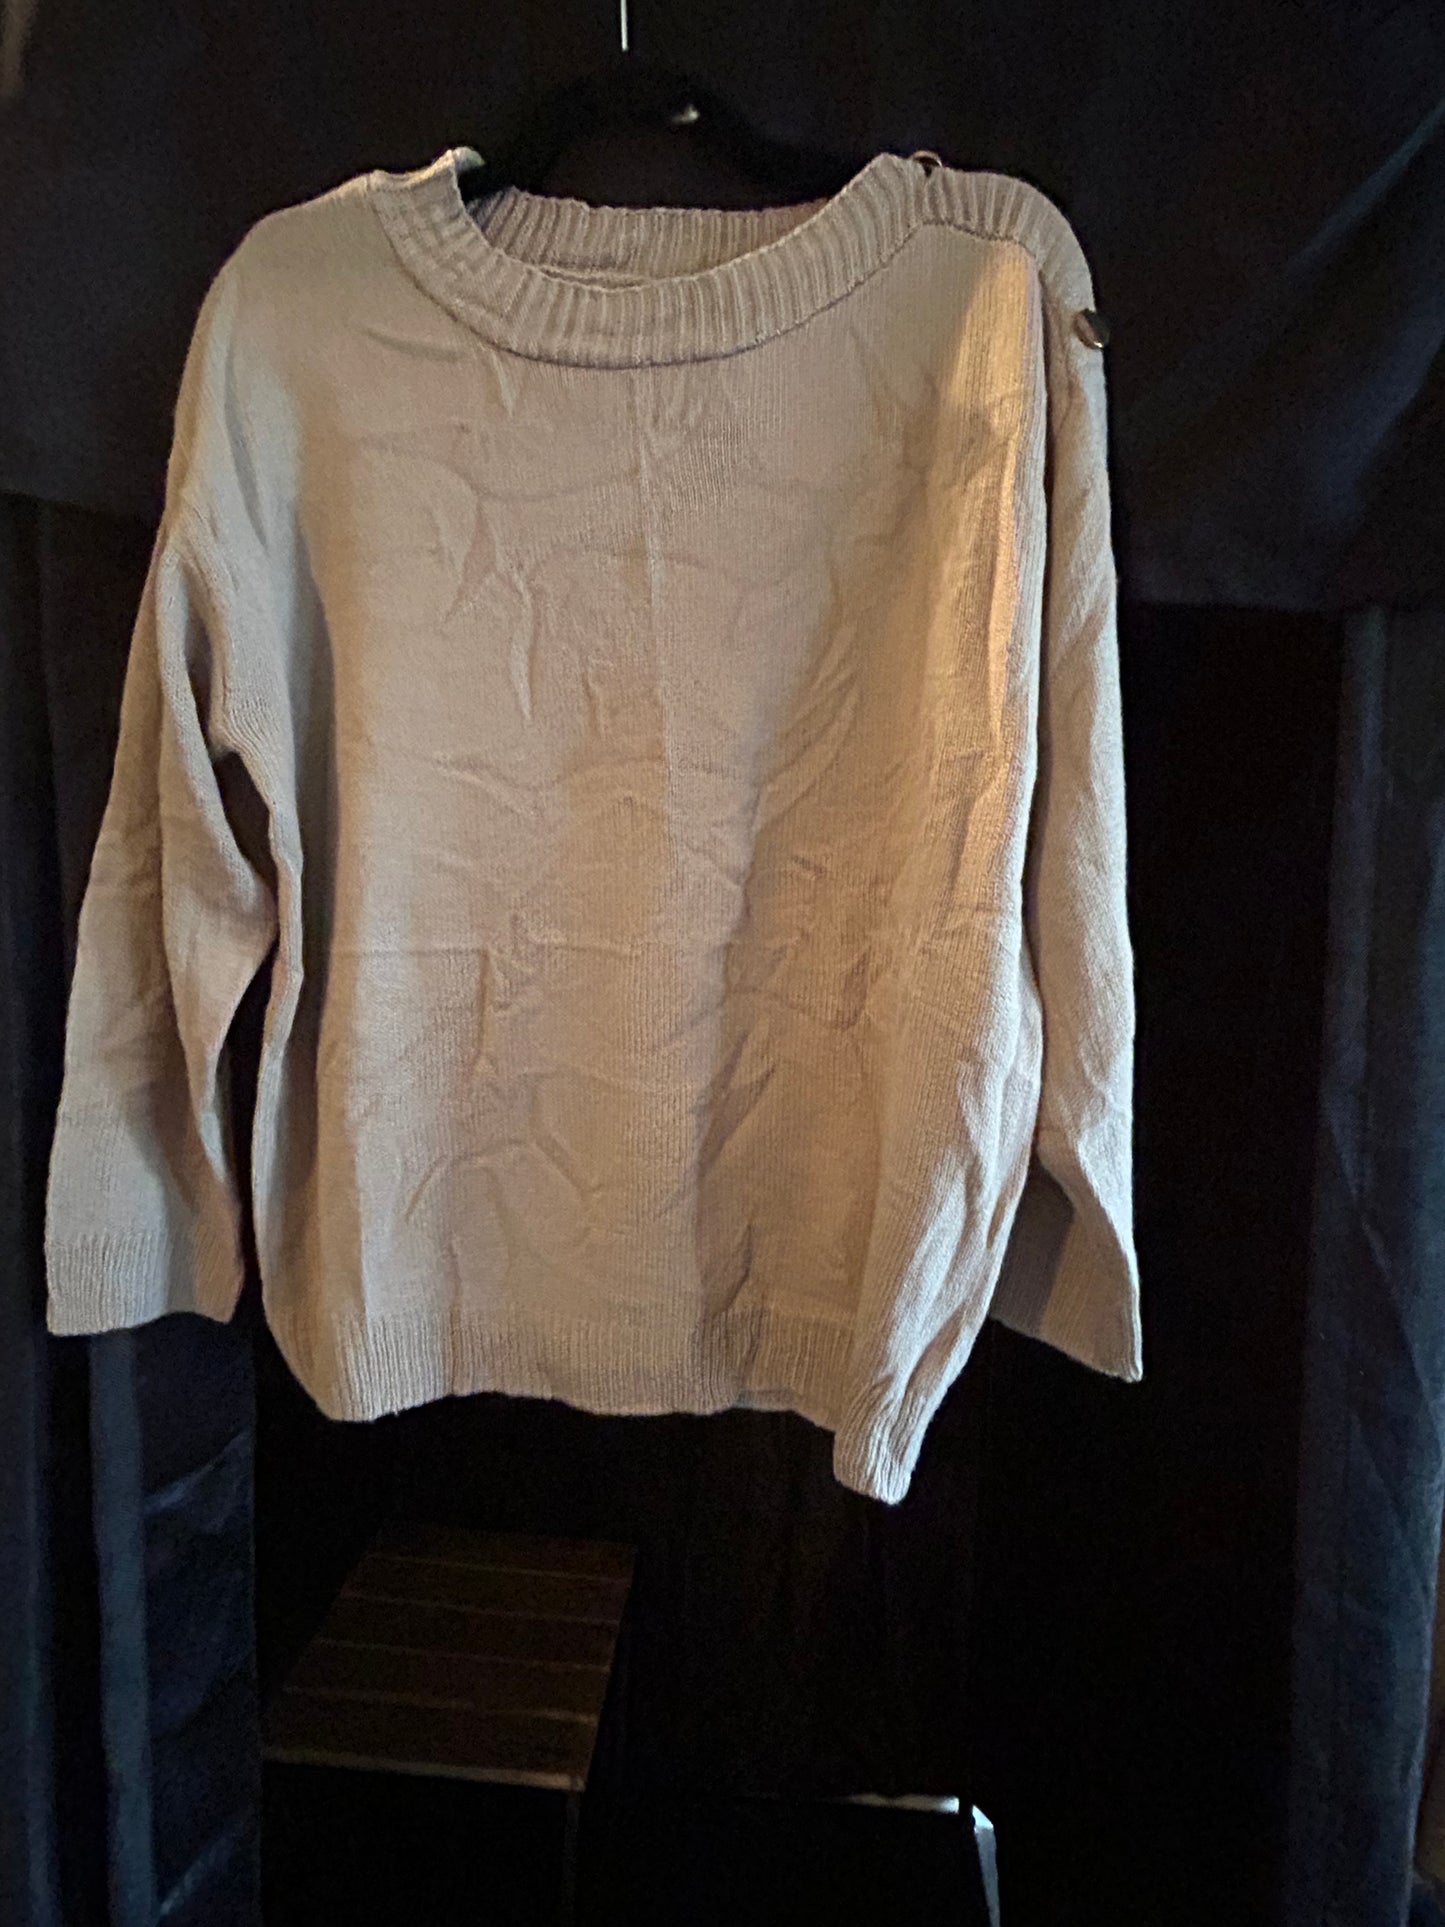 SHIRT- Beige Sweater with Gold Buttons